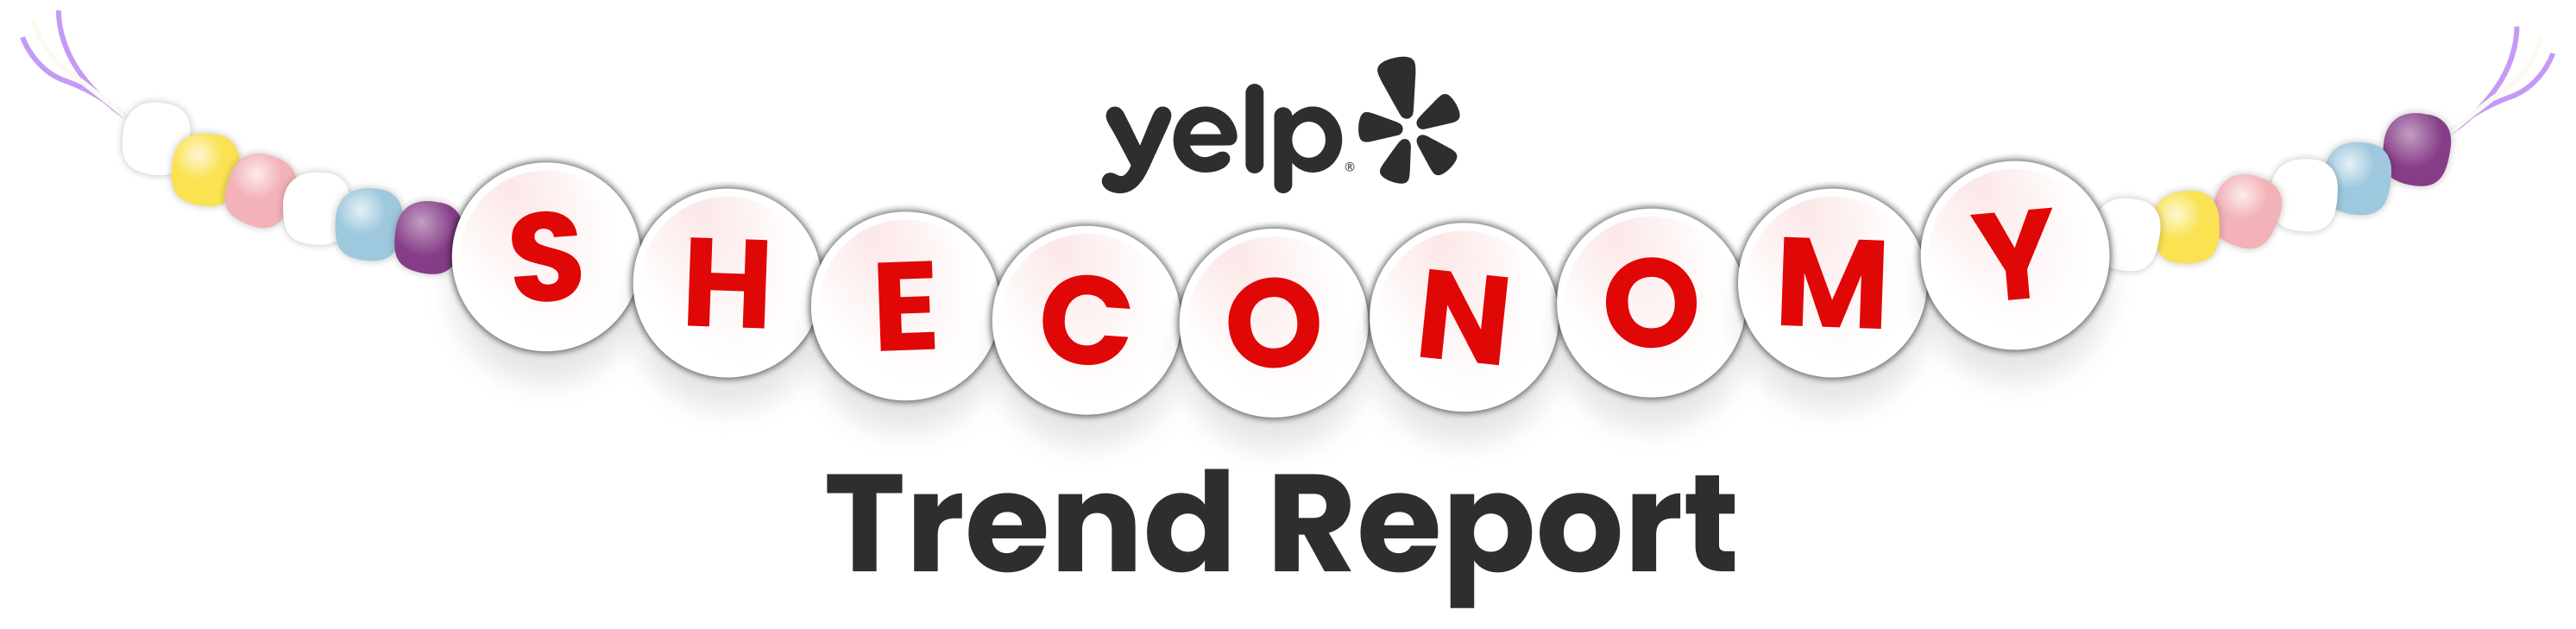 Yelp's She-conomy Trend Report